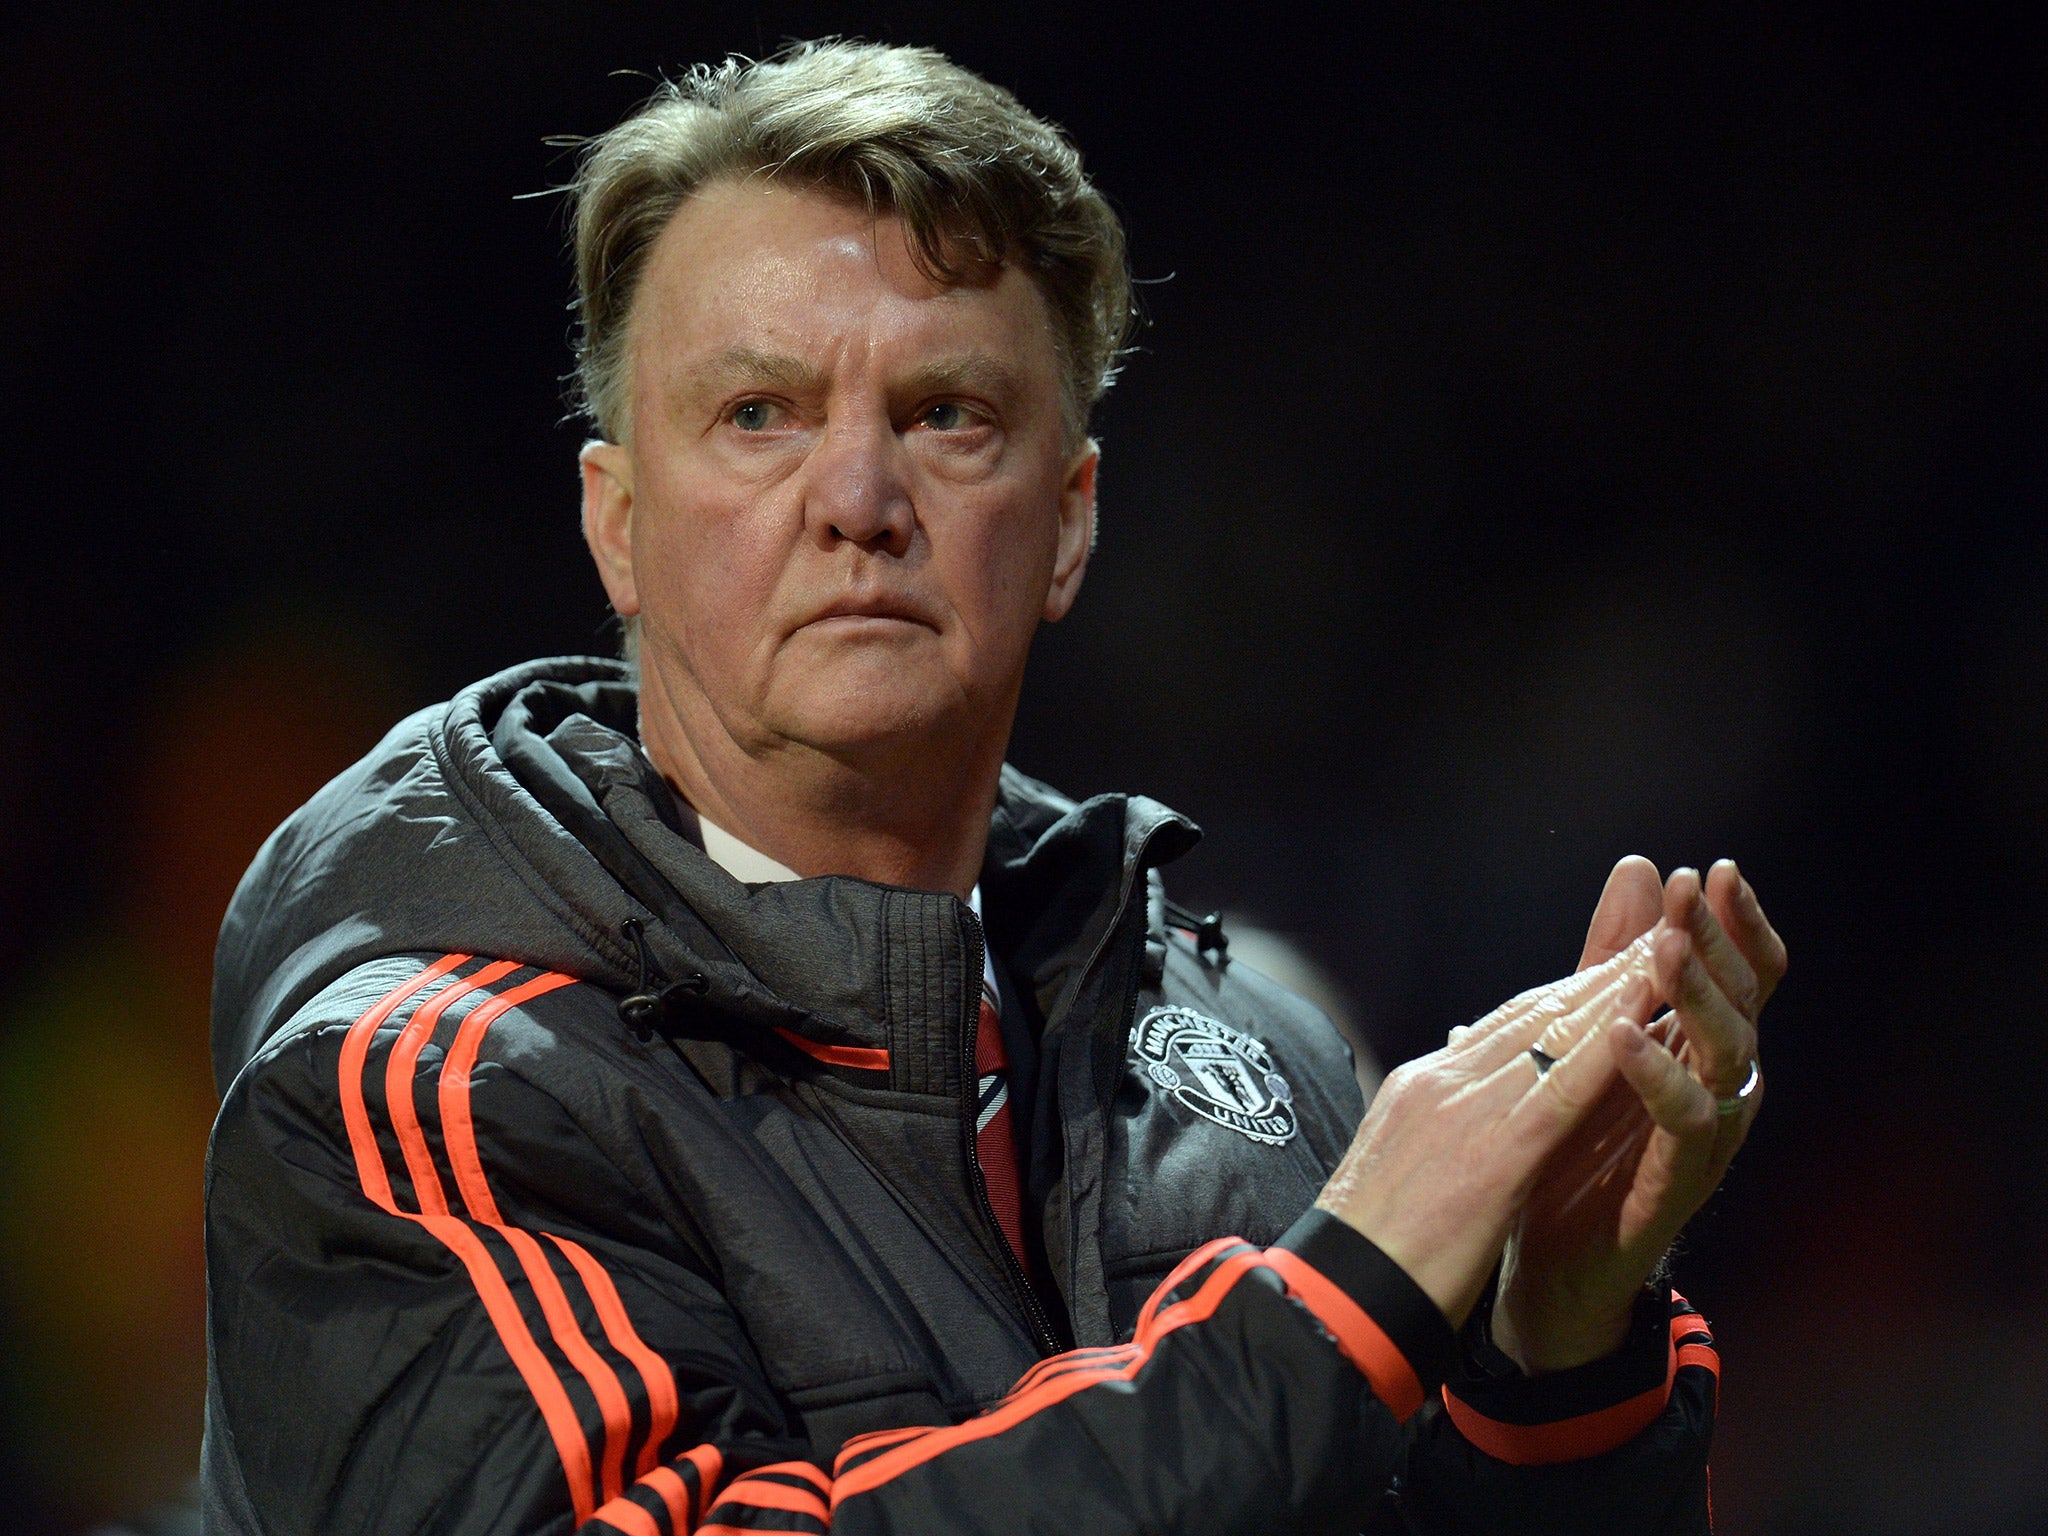 Louis van Gaal admitted he was pleased with Manchester United's performance despite Europa League elimination